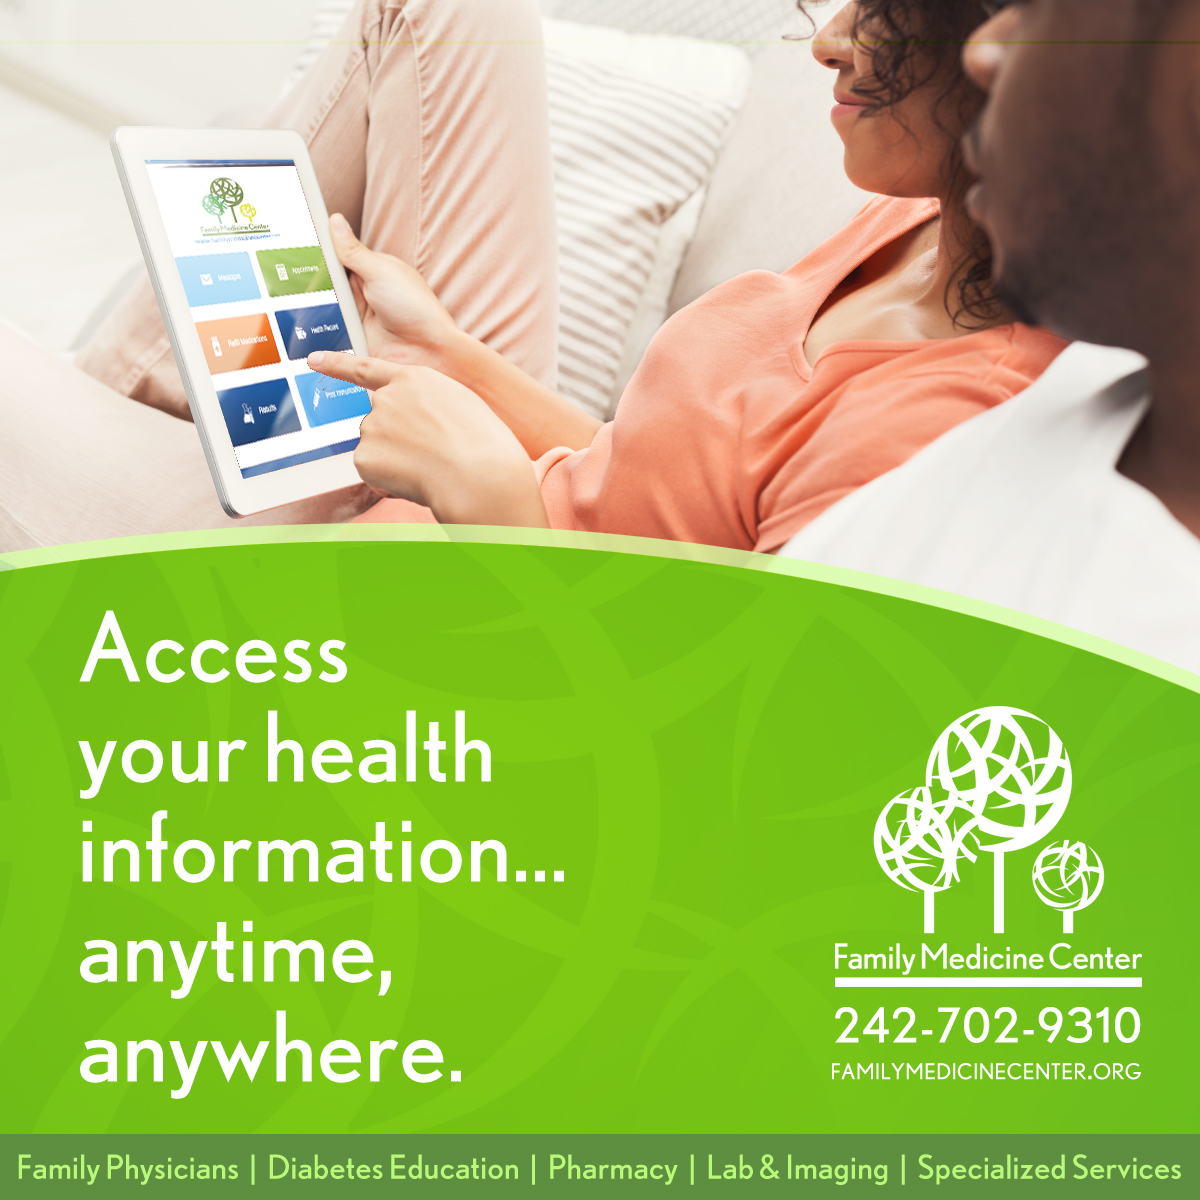 access-your-medical-records-anytime-anywhere-family-medicine-center